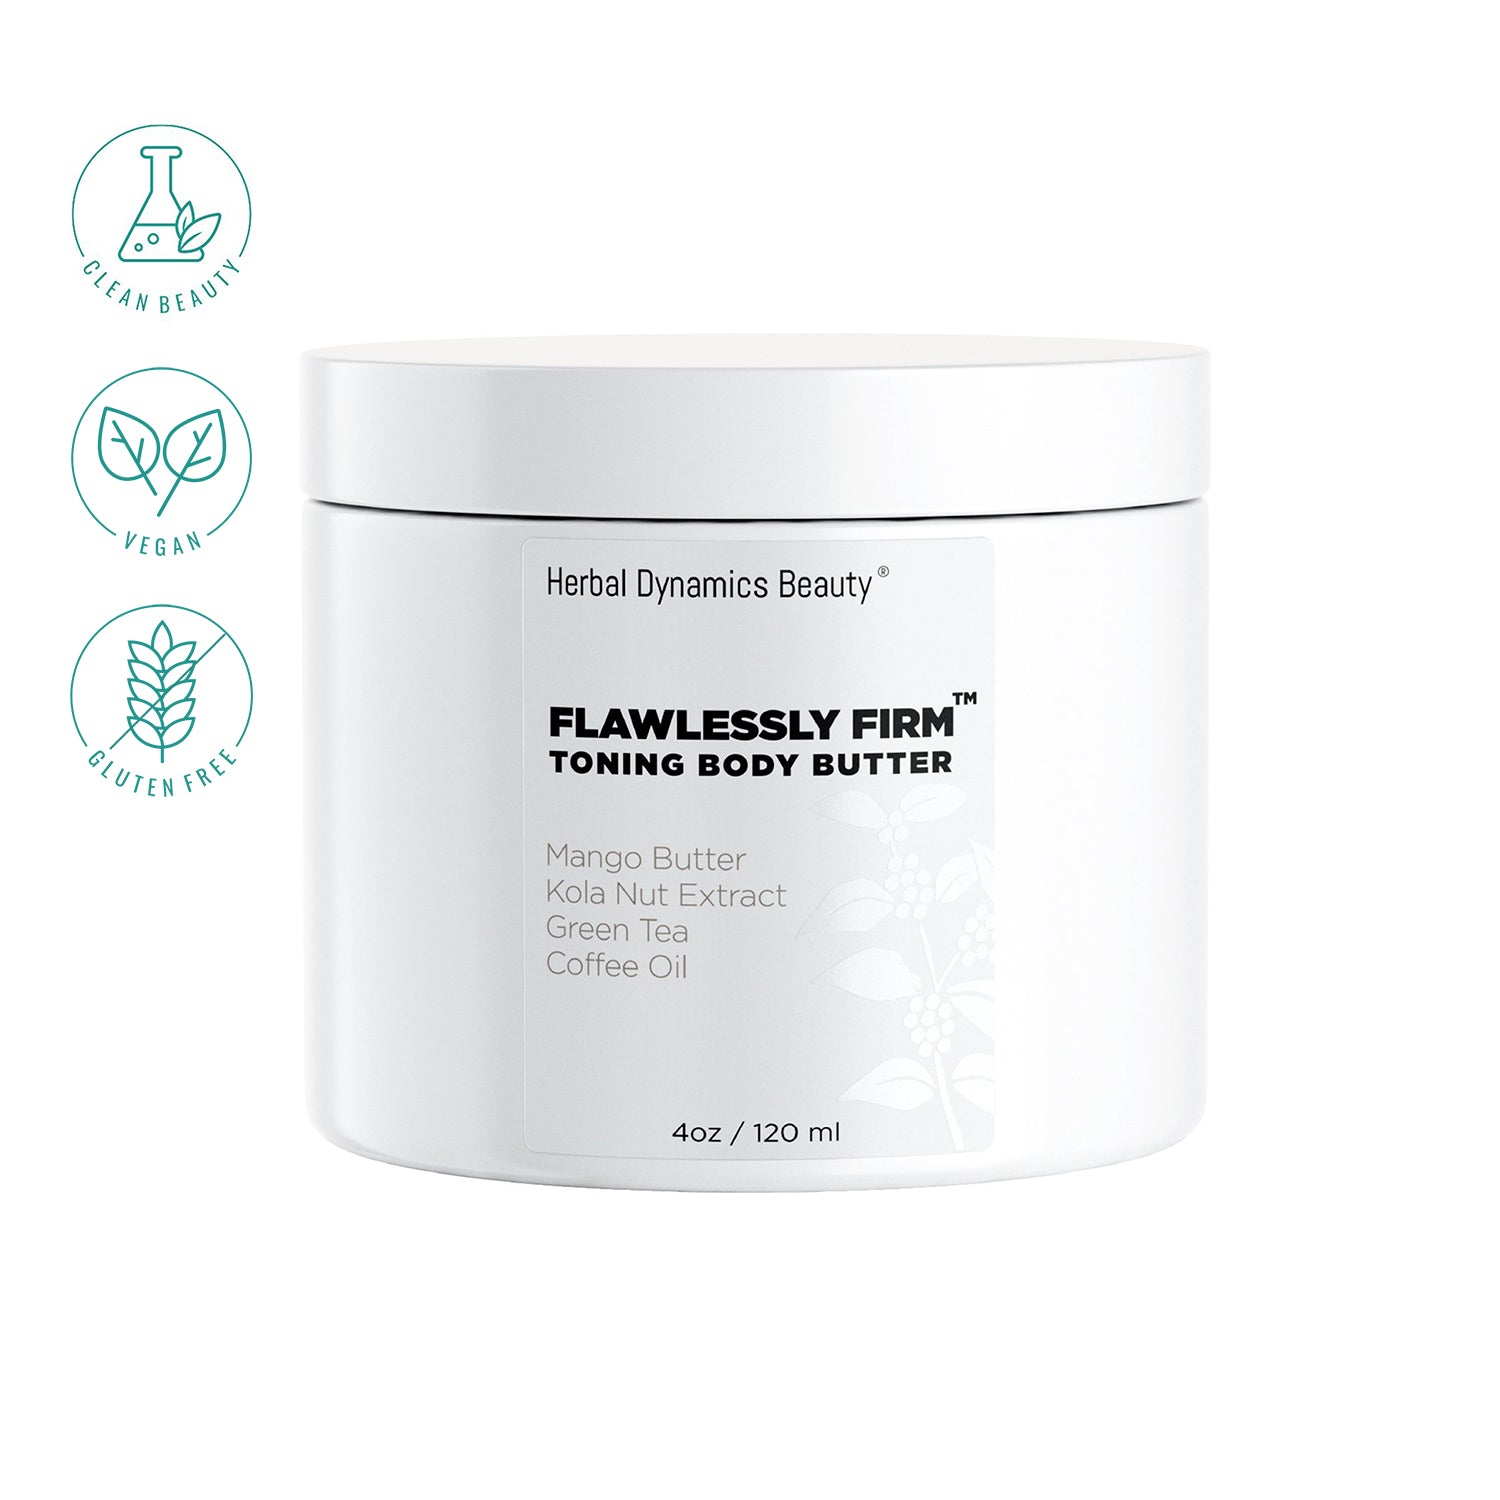 Flawlessly Firm™ Toning Body Butter